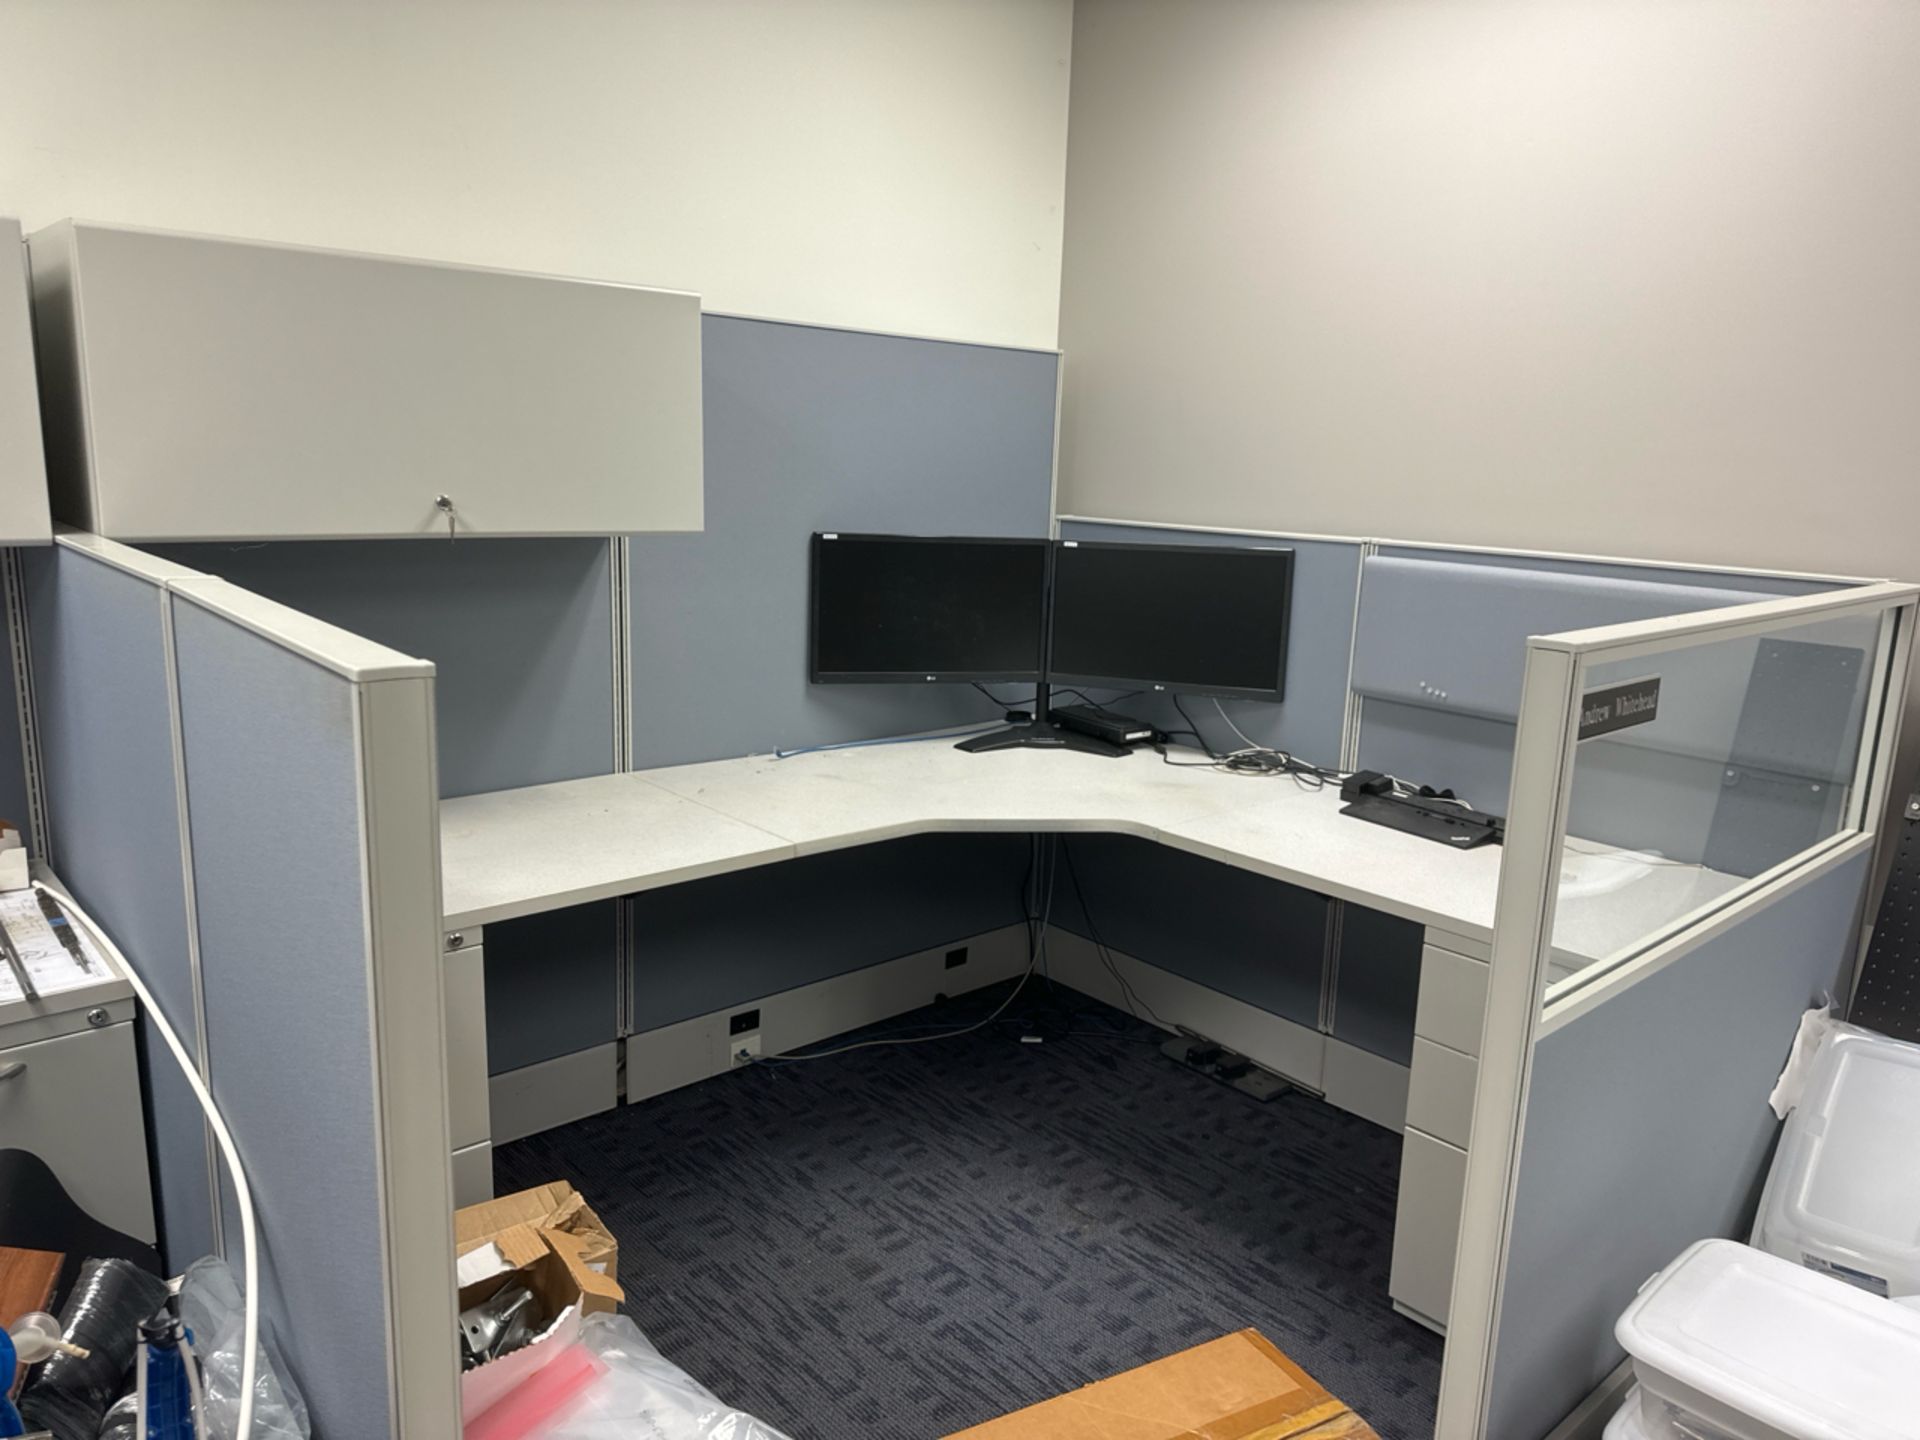 (24) Panel System Work Stations (Contents not Included) - Image 24 of 25